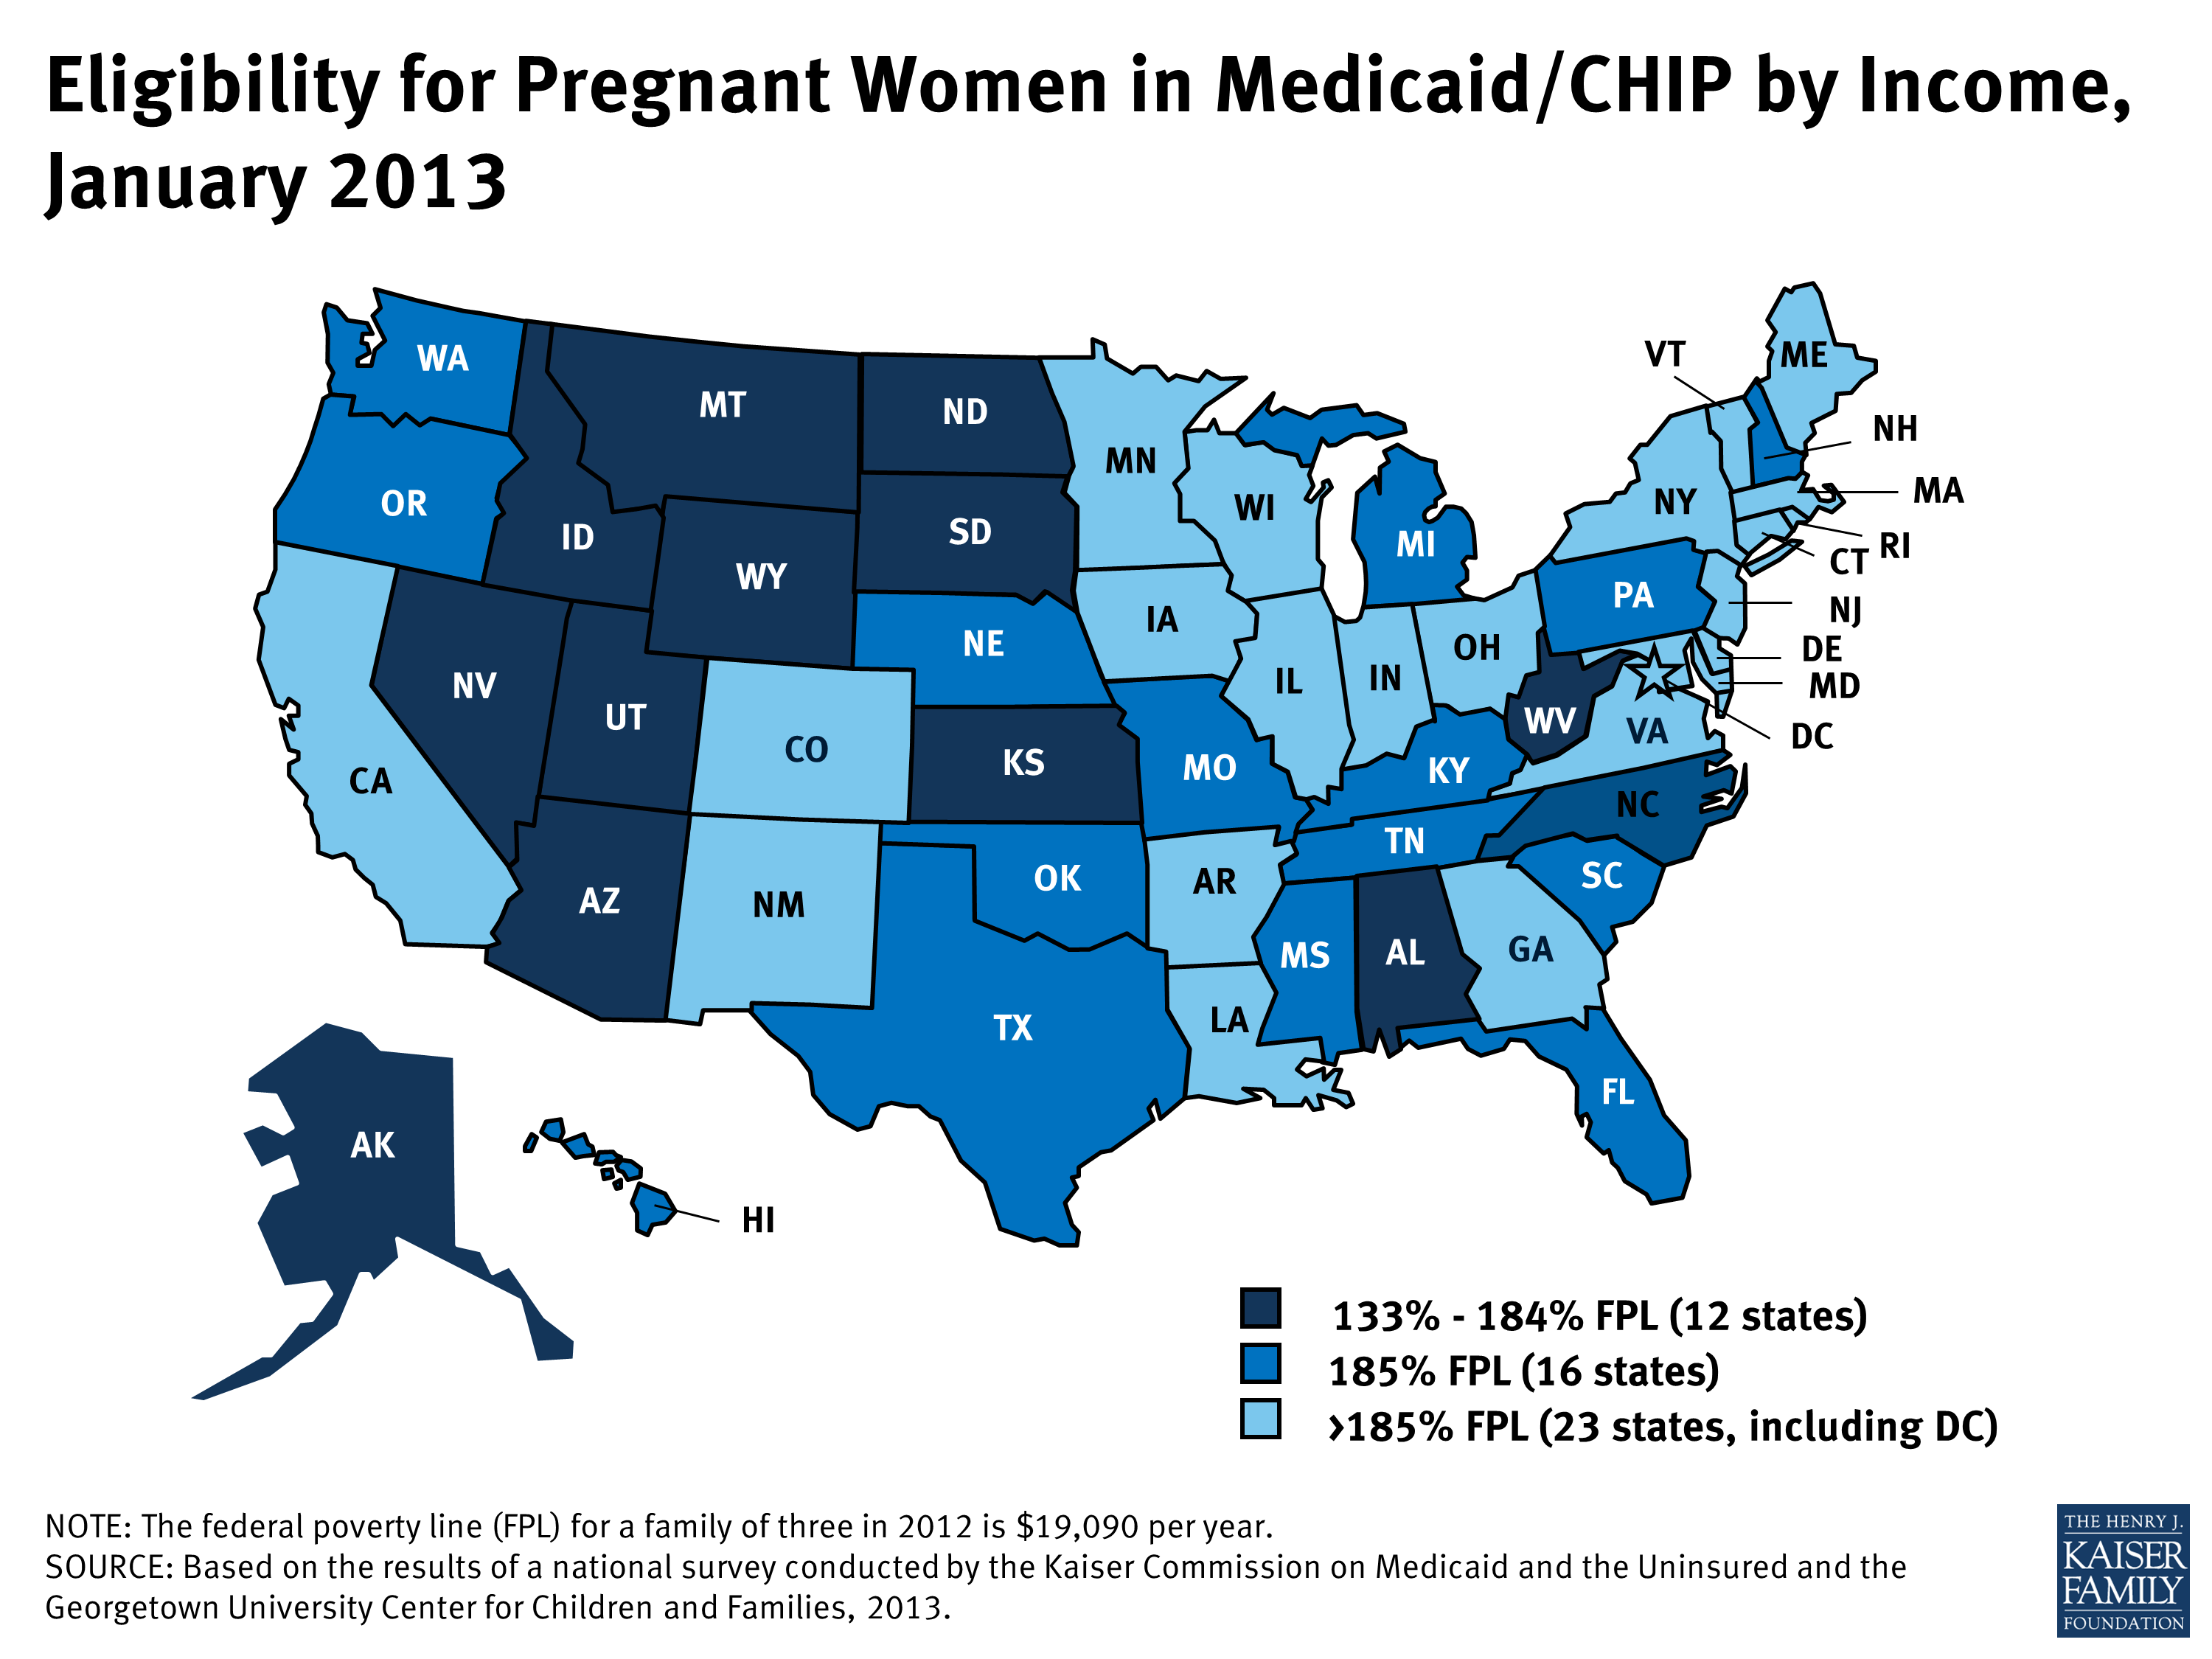 Eligibility for Pregnant Women in Medicaid/CHIP by Income, January 2013